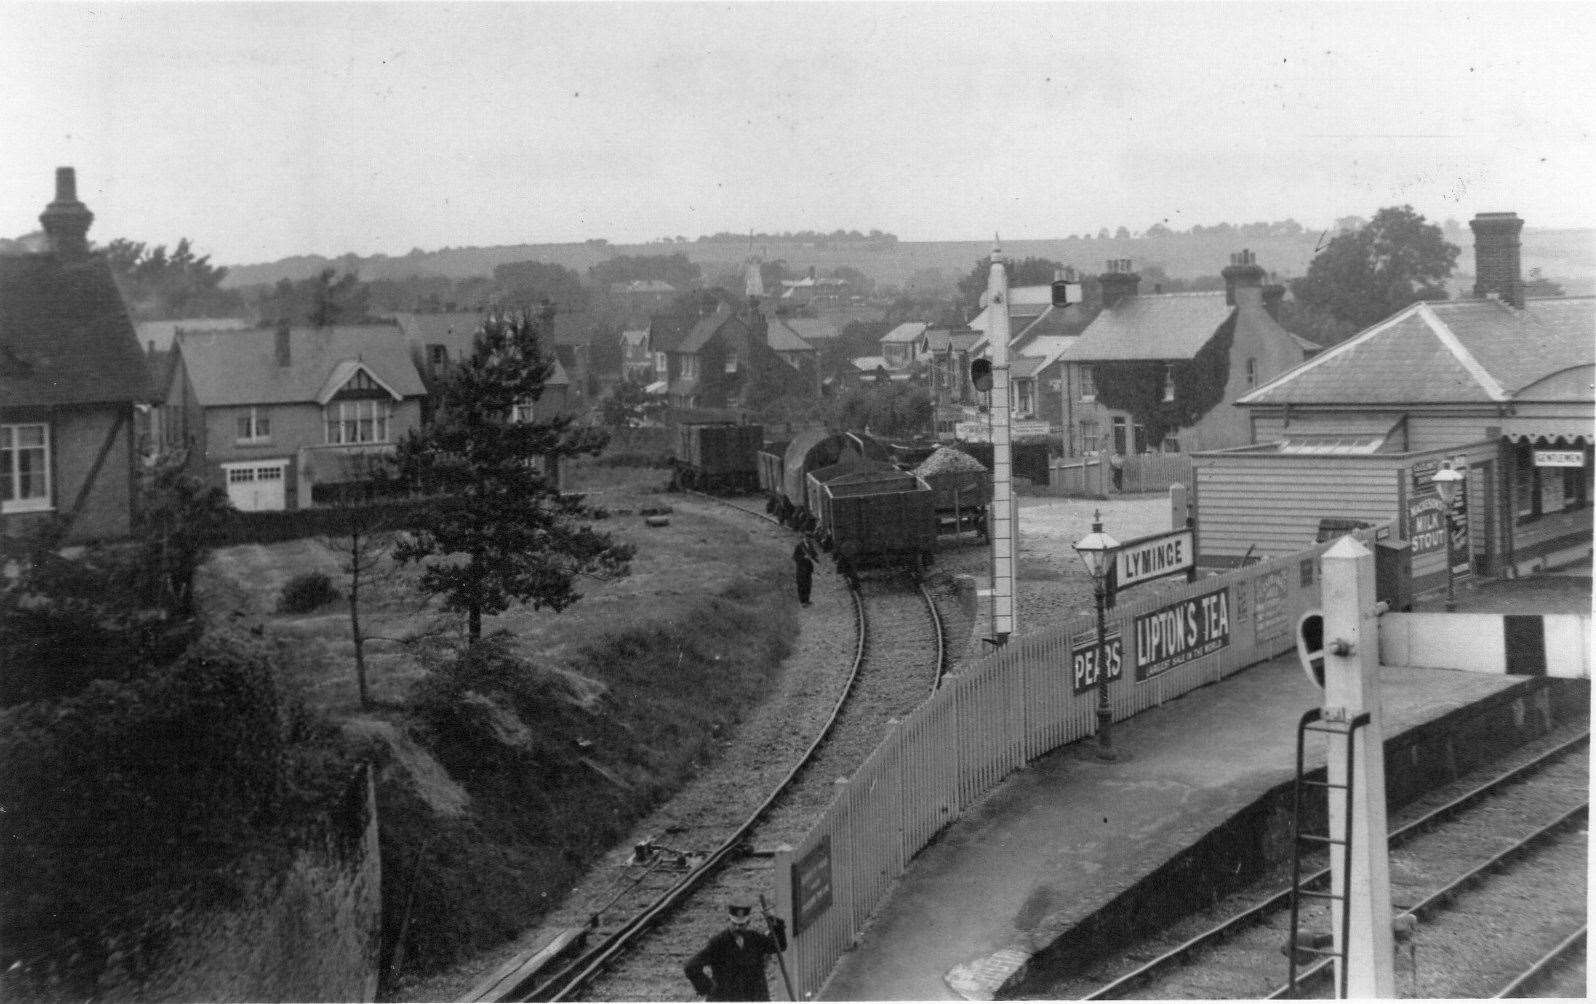 The former sidings at Lyminge station. Picture: from the collection of Lyminge Historical Society